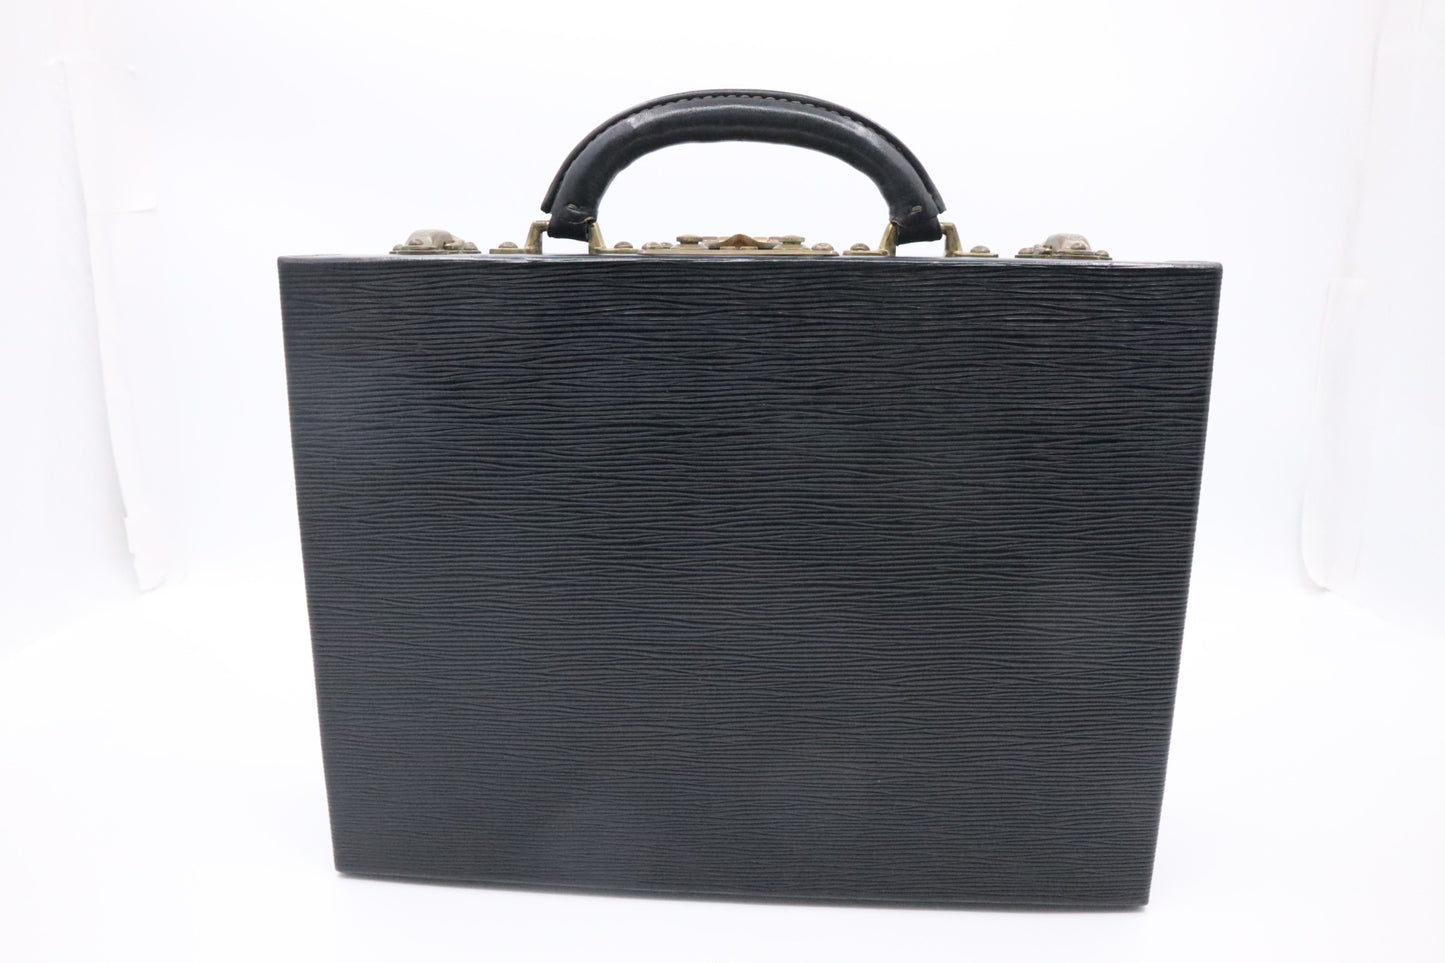 Louis Vuitton Jewelry Briefcase in Black Epi Leather